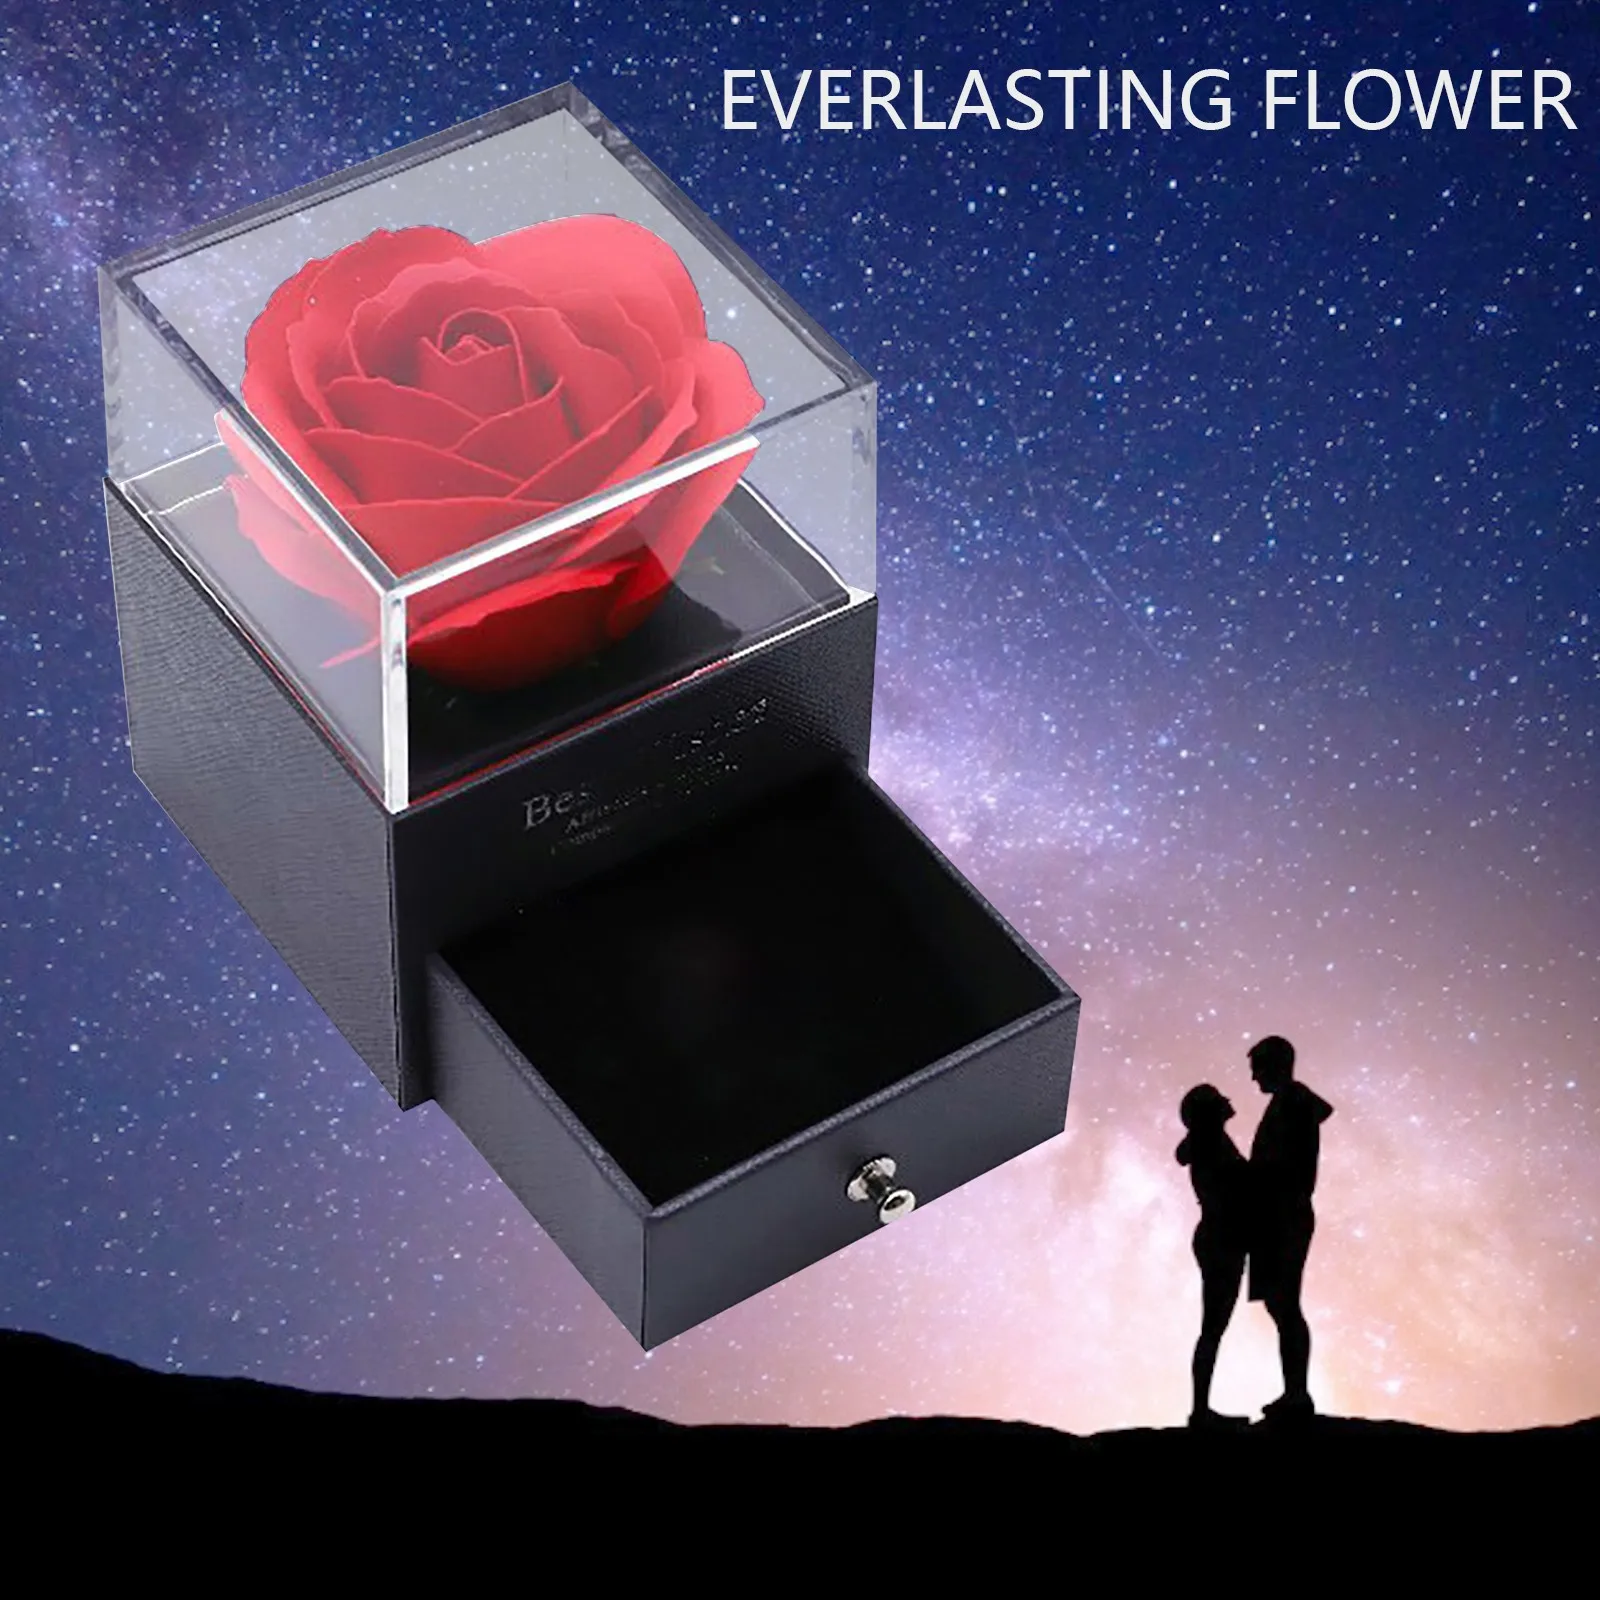 S19bbfcc686eb4a79ac2ffed46e1766050 Everlasting Flower Gift Box Rose Preservation Box Mother's Day Handmade Rose Gif